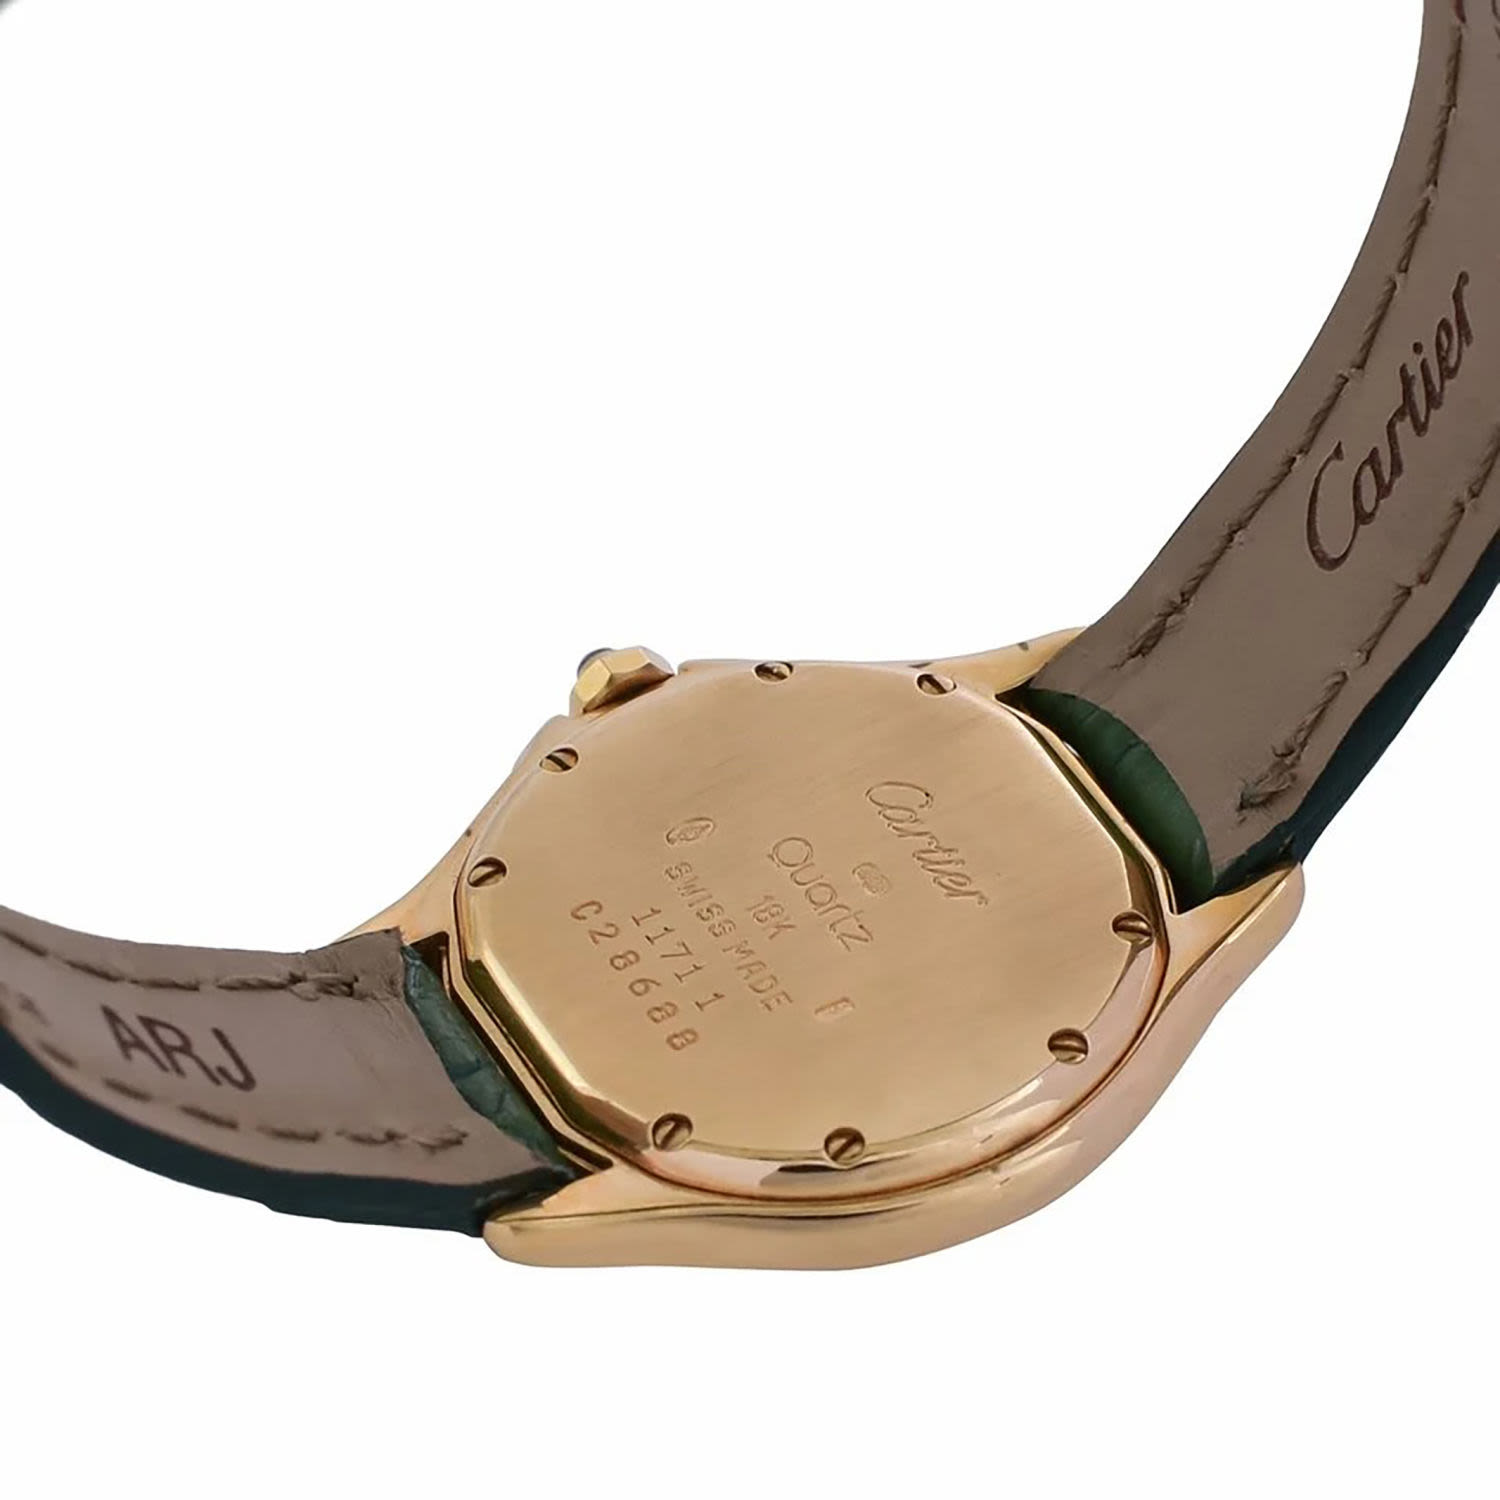 Cartier Cougar 150 Anniversary Edition wristwatch, in 18k gold, for Women - Image 4 of 5